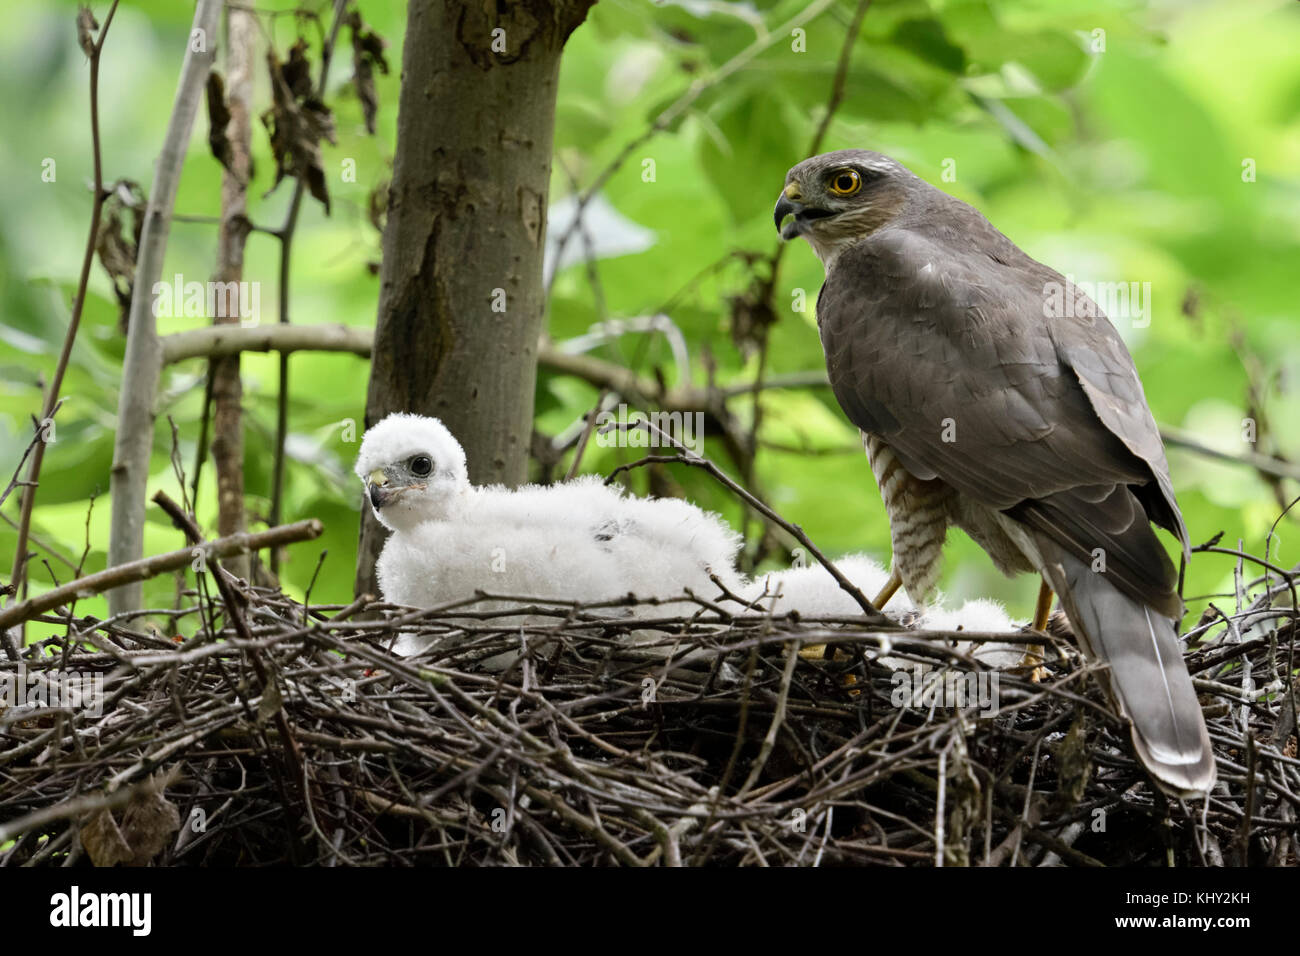 Eurasian Sparrowhawk / Sperber ( Accipiter nisus ), adult female, perched with prey on the edge of its nest, with young chick, calling, wildlife, Euro Stock Photo